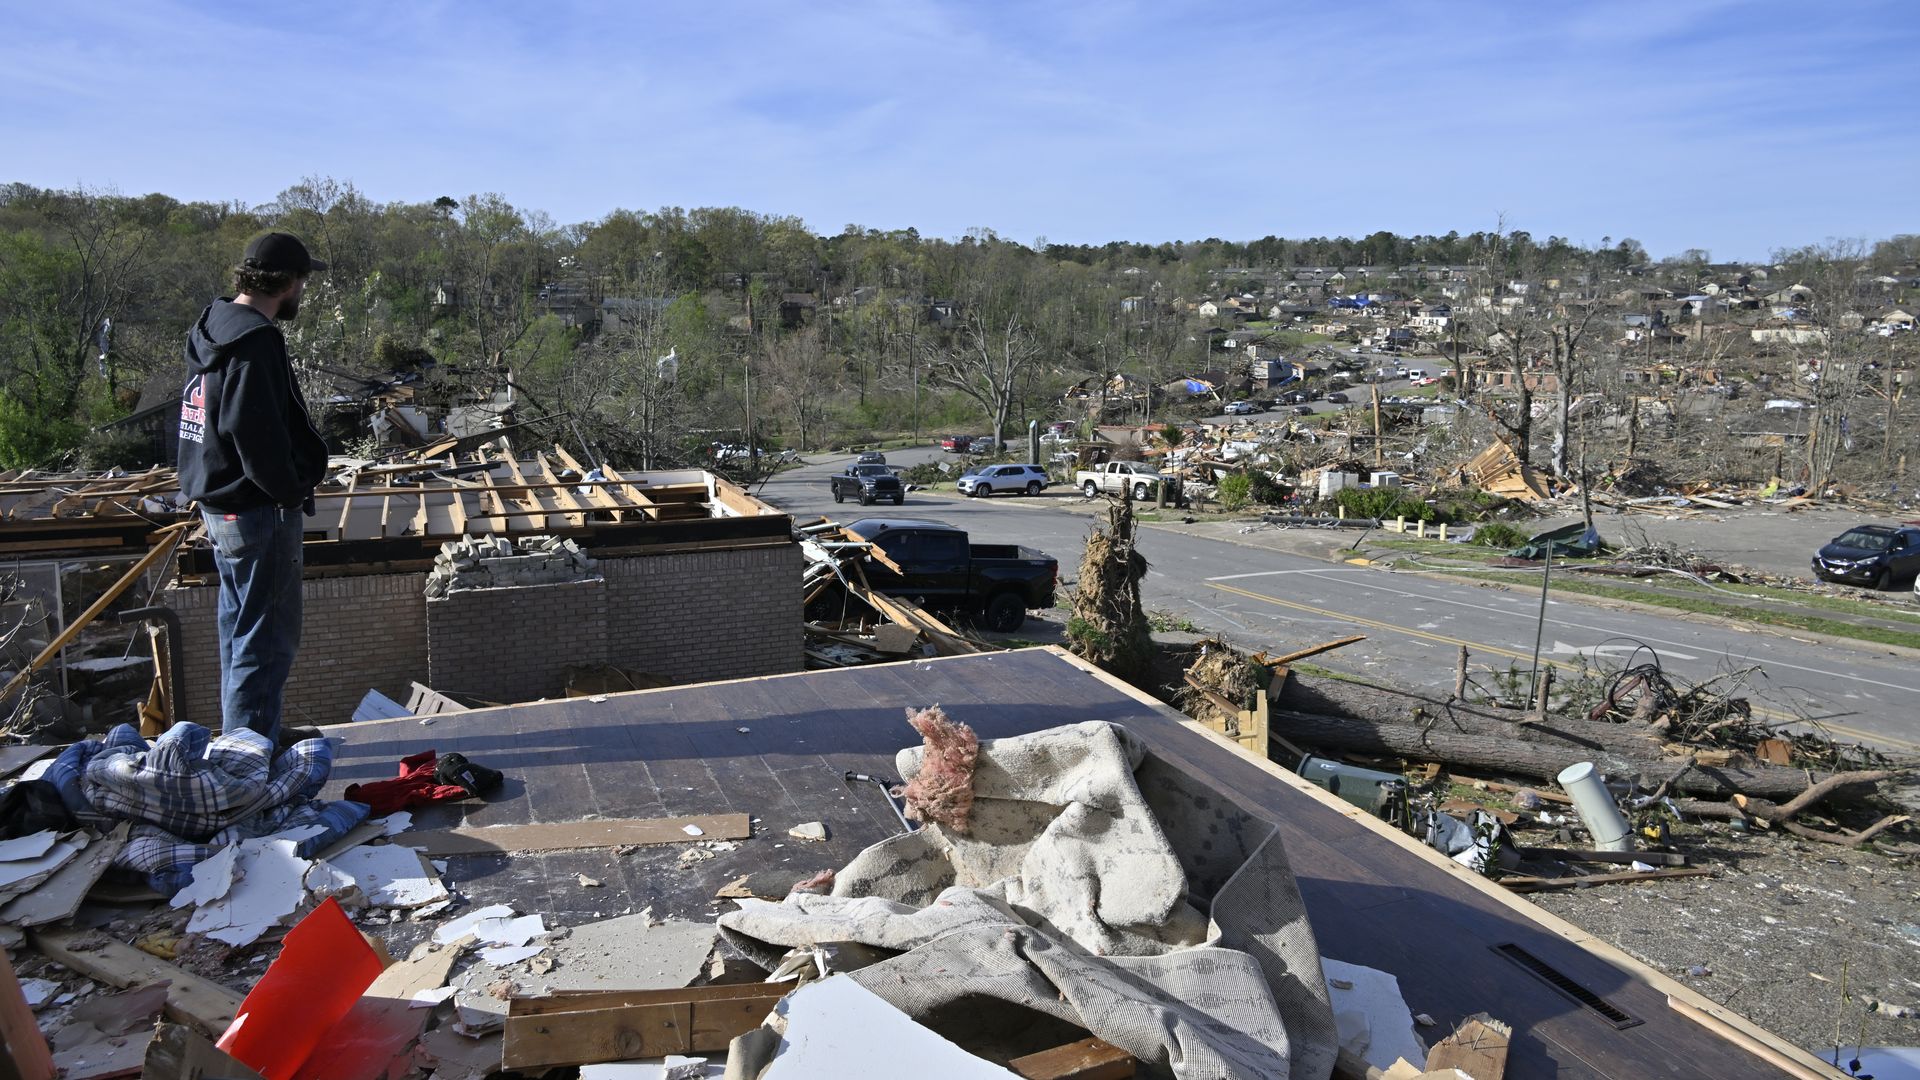 A view of the area after the tornado covering a path of dozens of miles in length caused severe damage in Little Rock, Arkansas, United States on April 02, 2023.